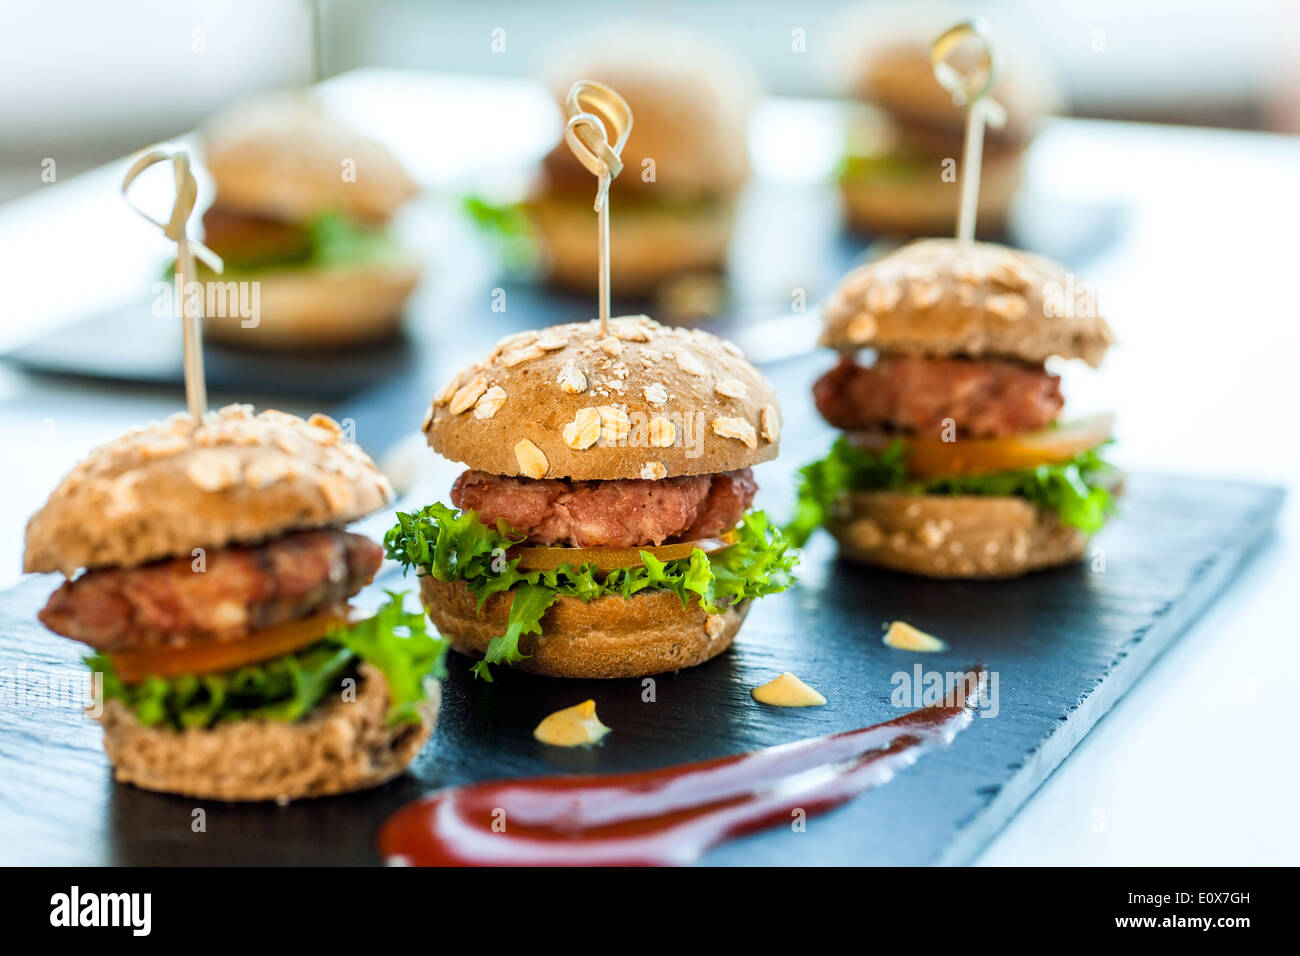 Macro close up of multiple mini hamburgers for catering services. Stock Photo